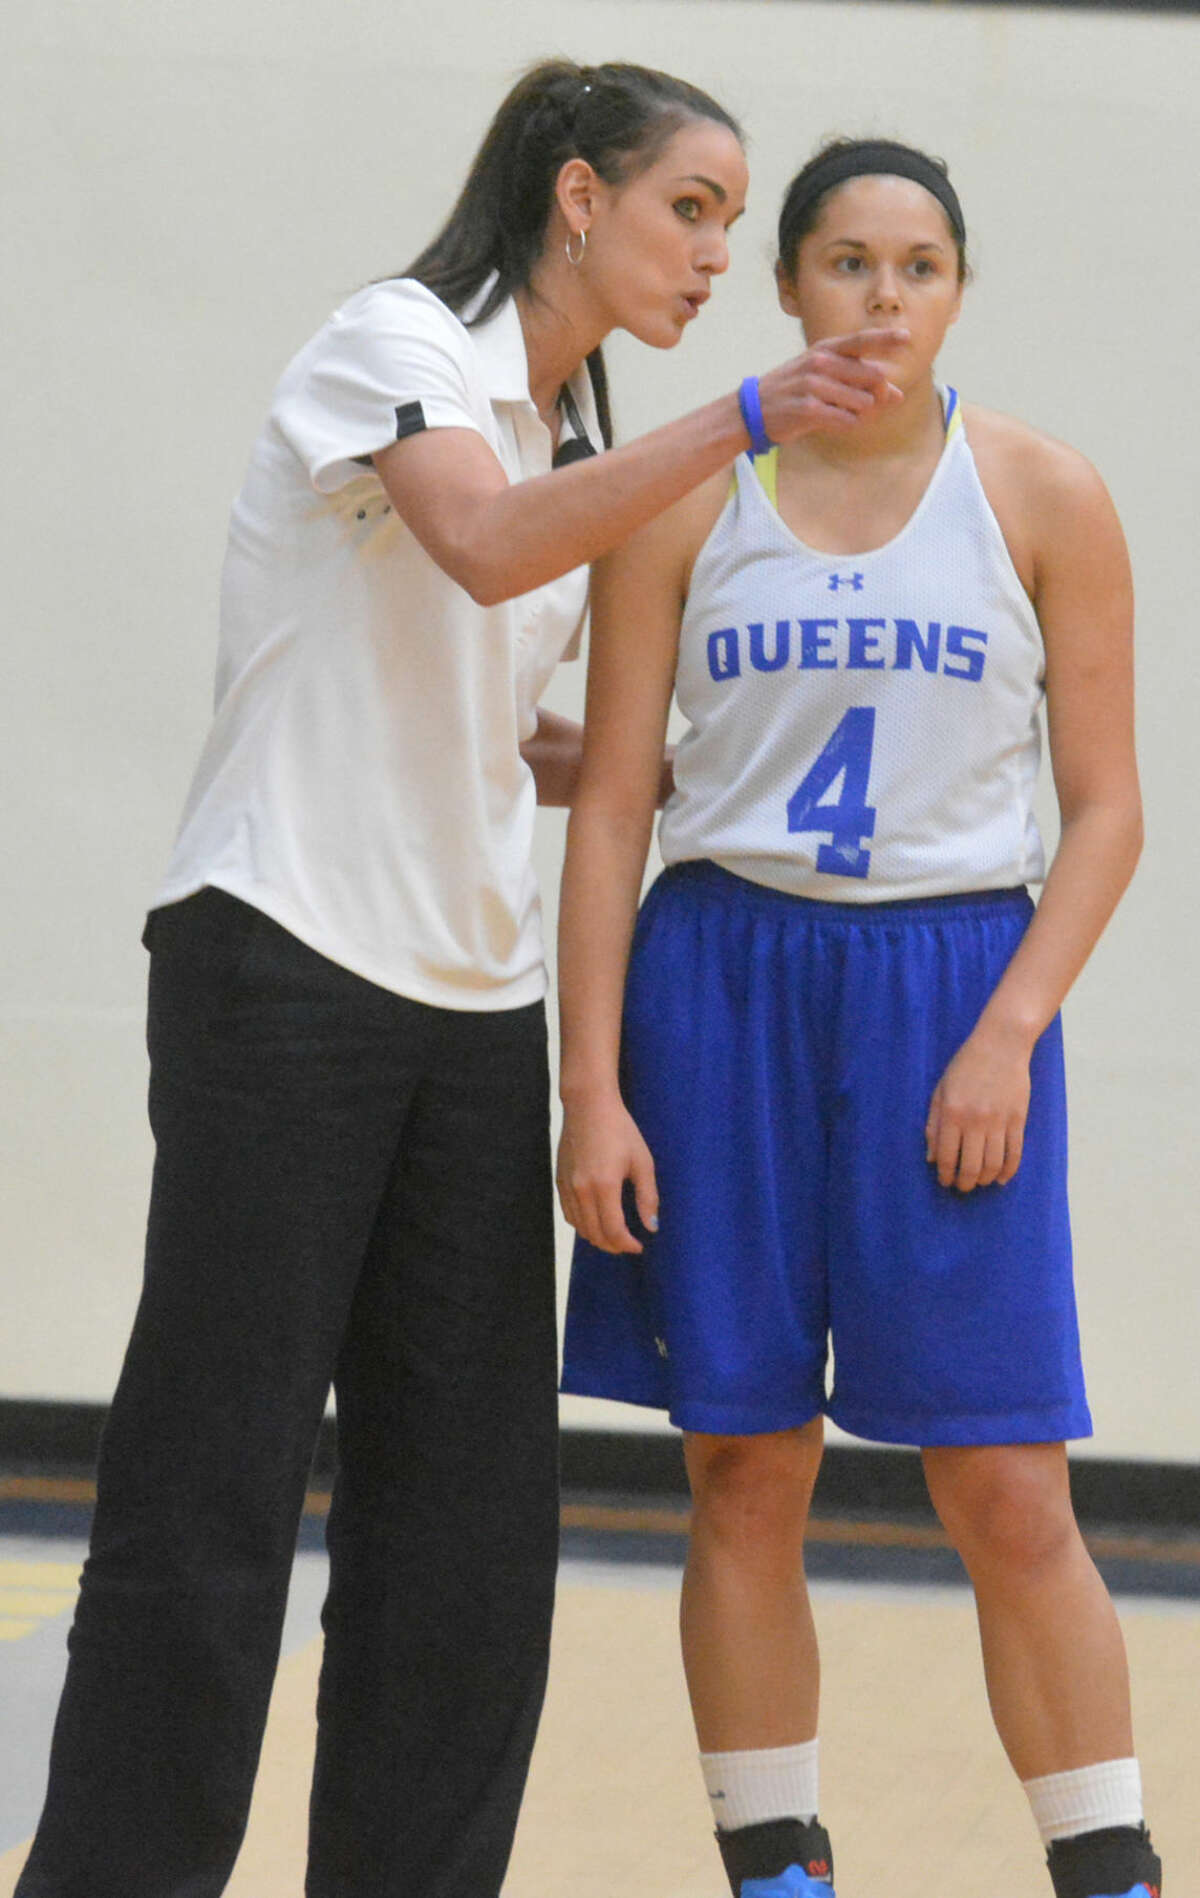 Wayland Baptist University women's basketball coach Alesha Robertson-Ellis points something out to Flying Queen Shawna Monreal (4) during a scrimmage earlier this season. Robertson-Ellis is beginning her second season as the Flying Queens' coach.